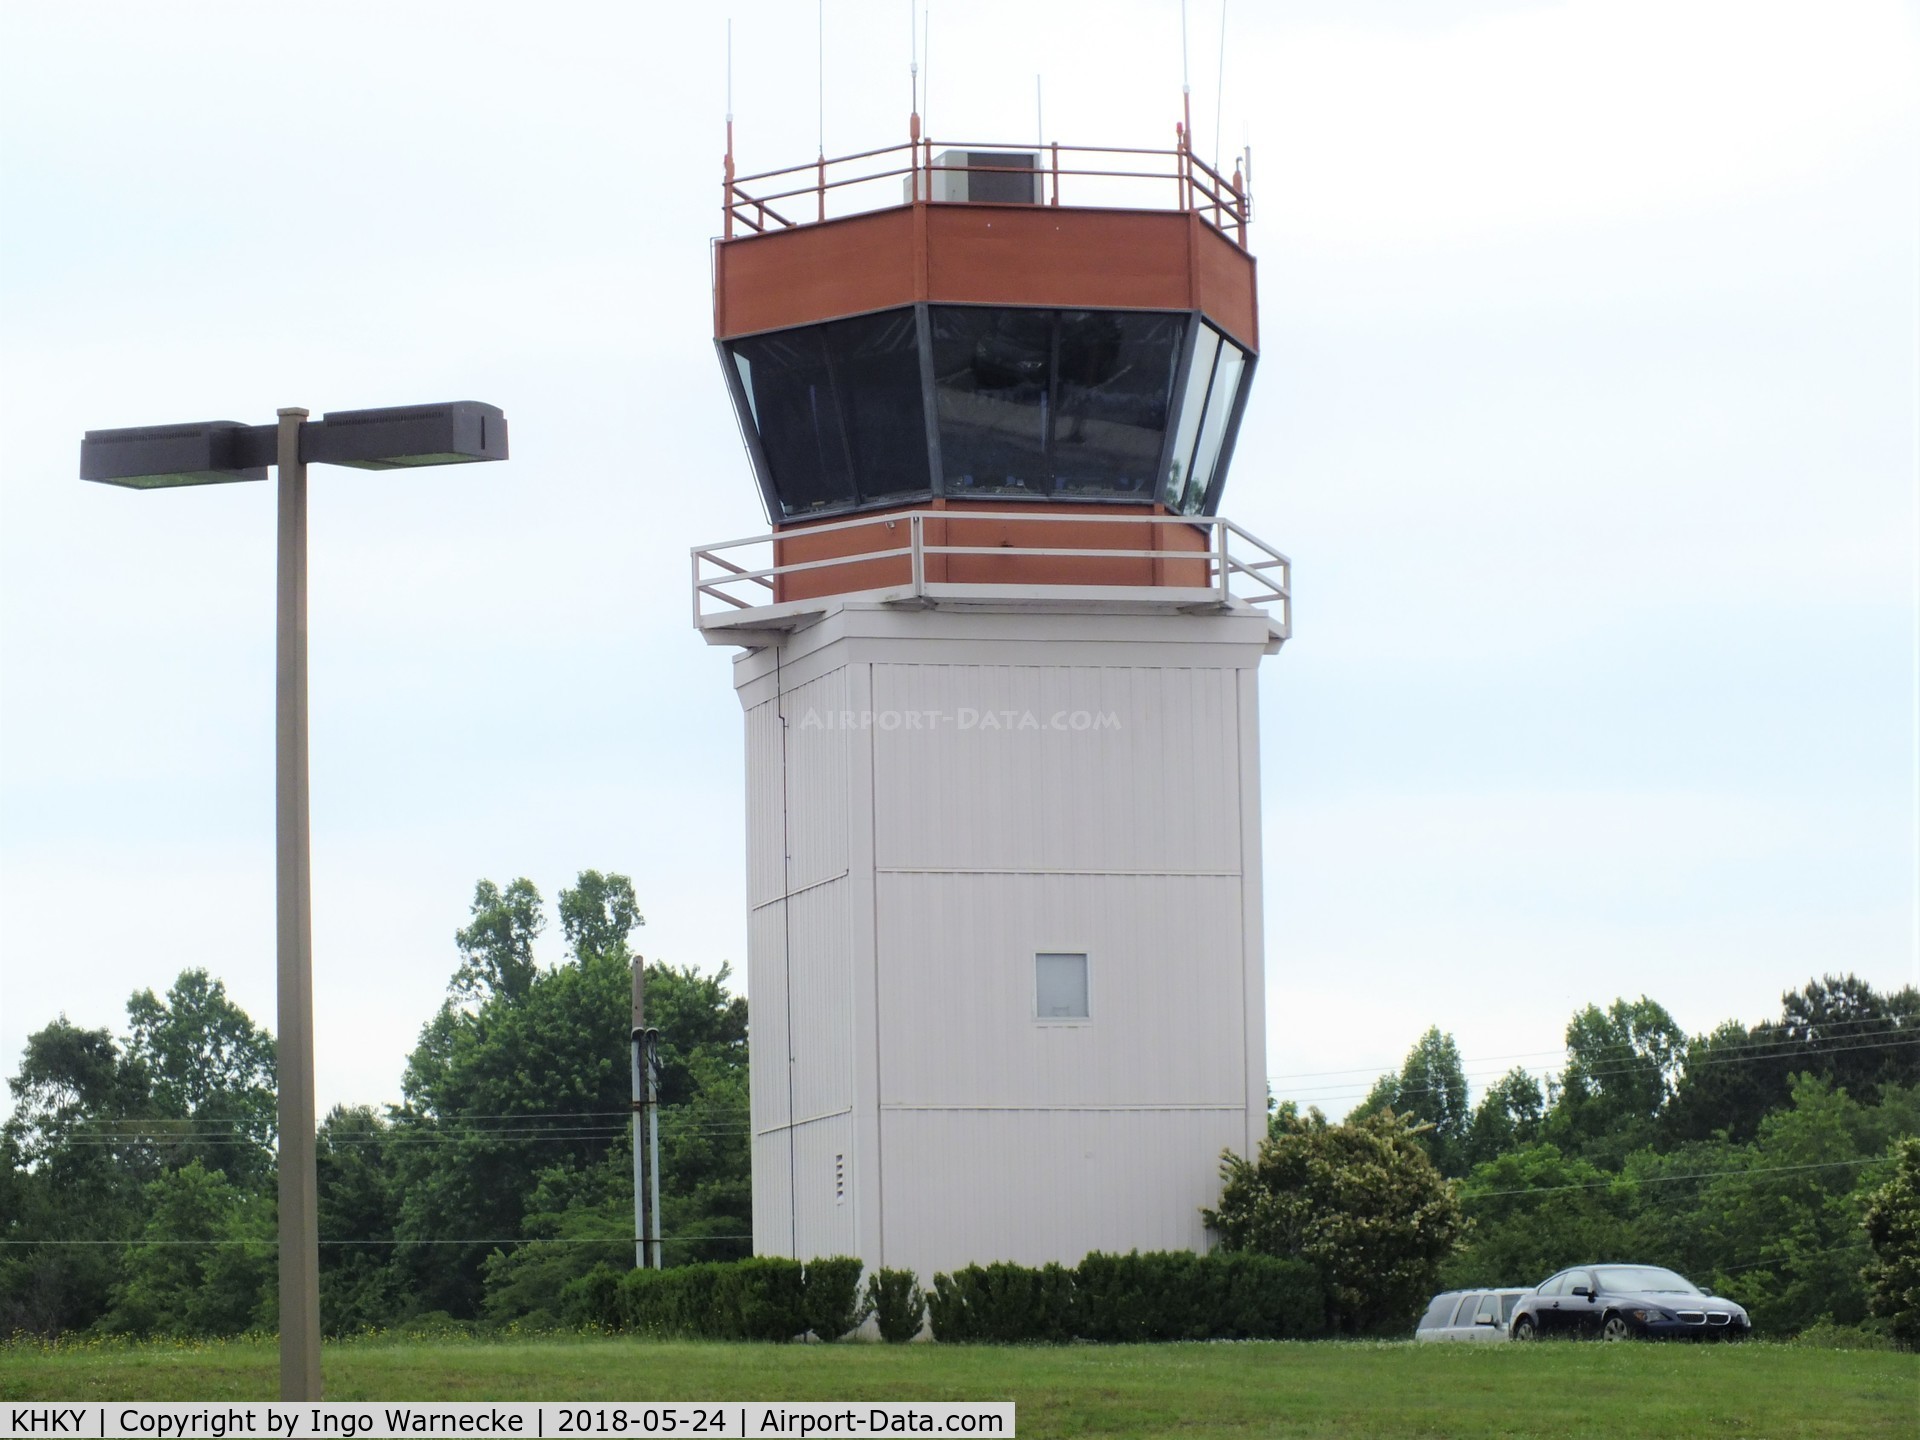 Hickory Regional Airport (HKY) - tower of Hickory regional airport, Hickory NC